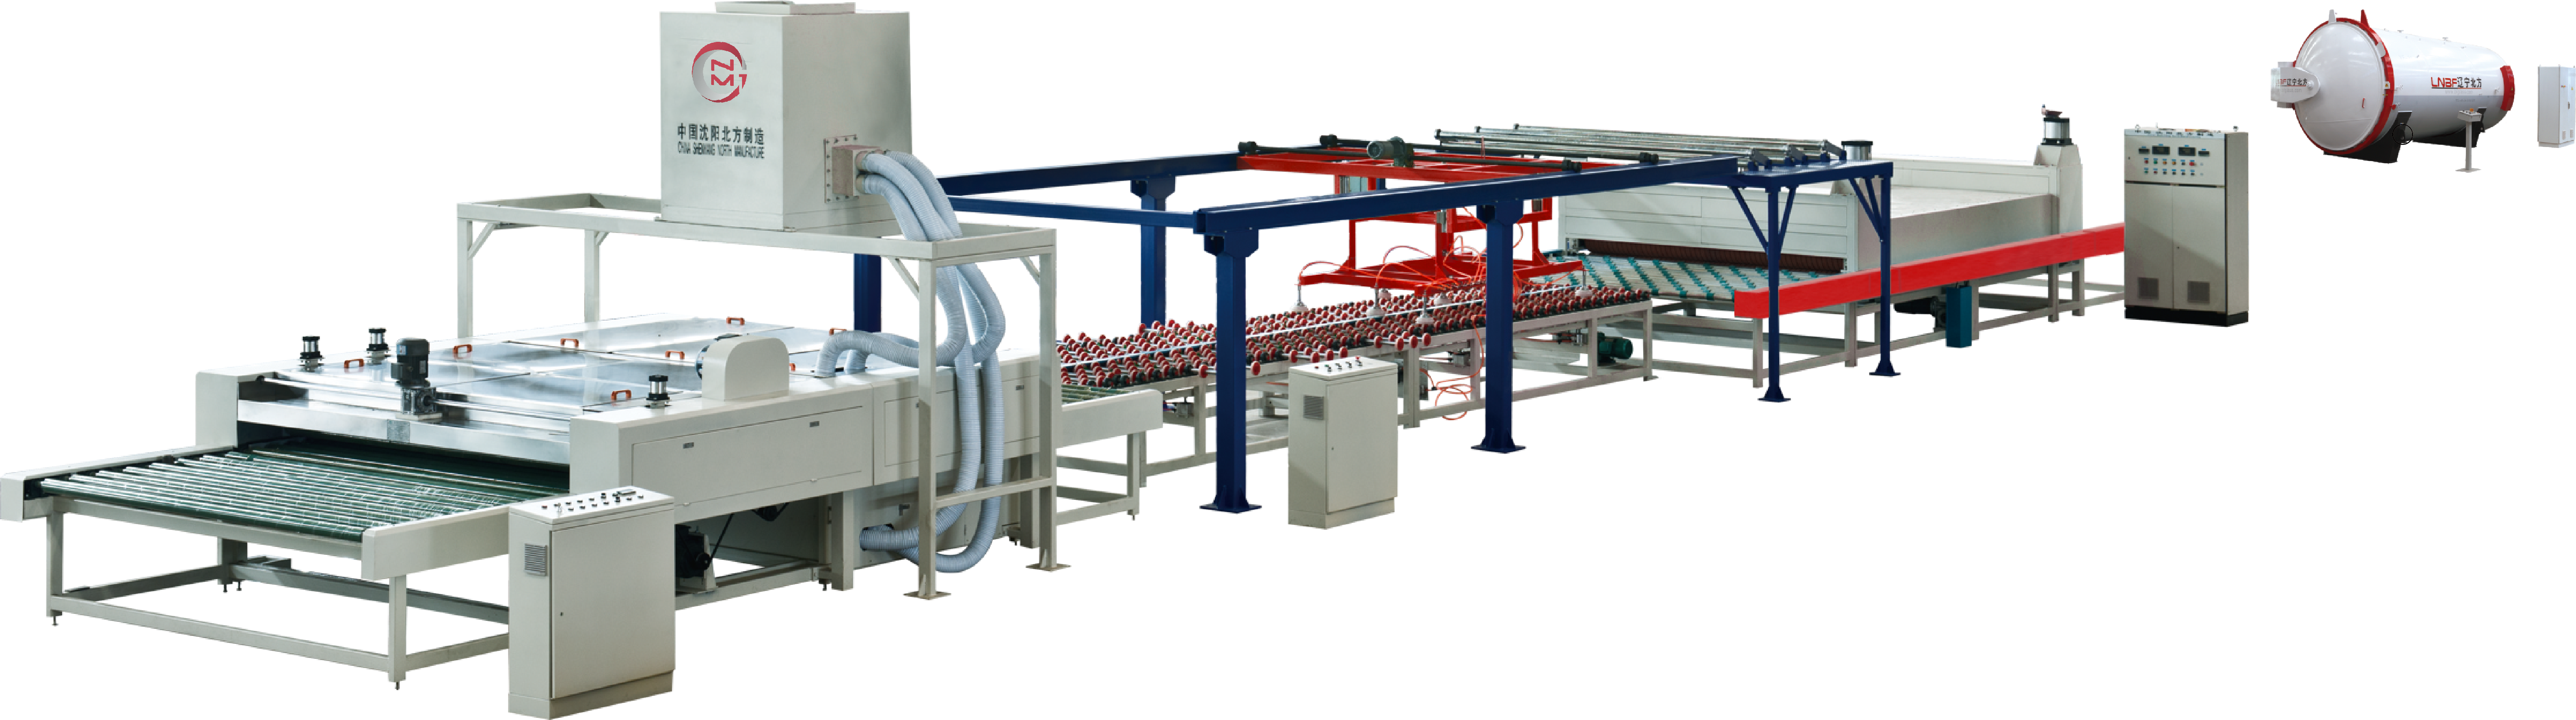 Architecture laminated glass production line